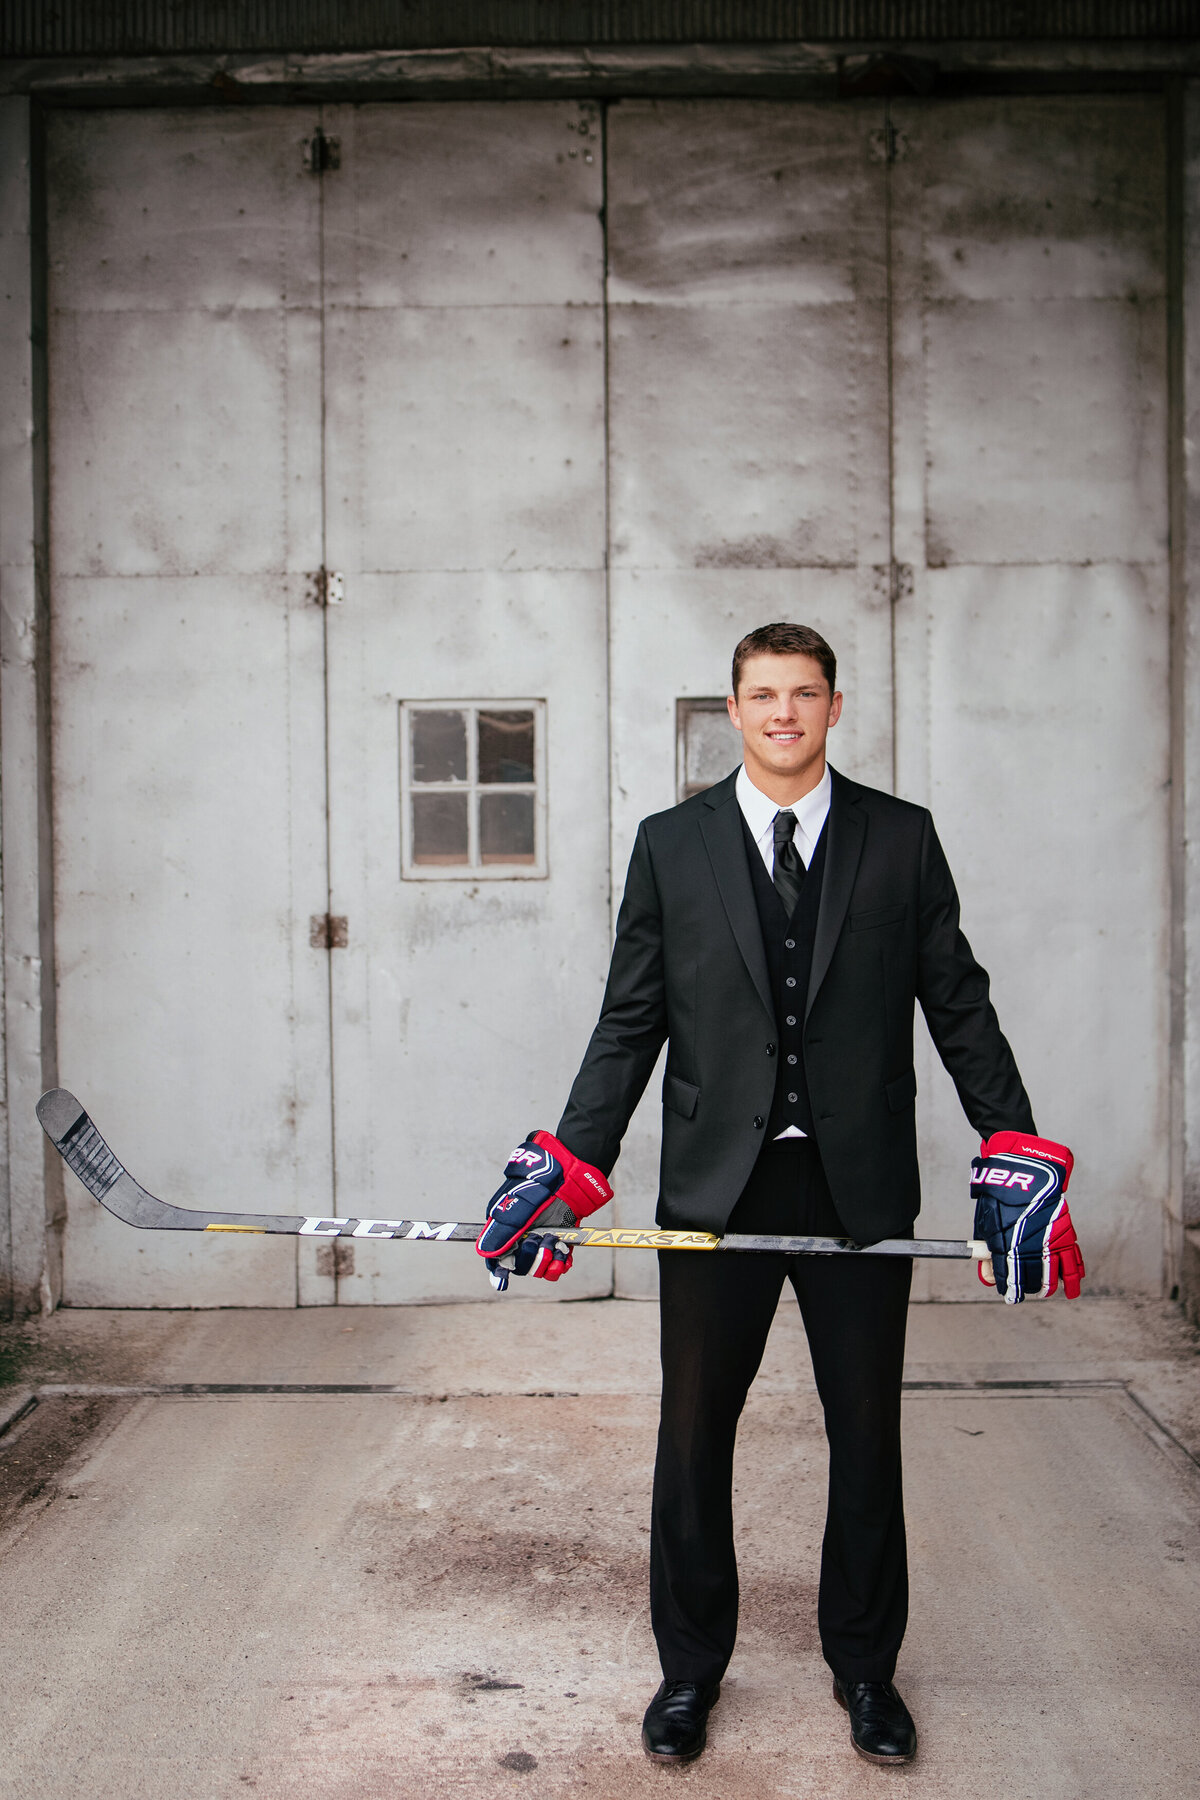 Boy in suit with hockey stick